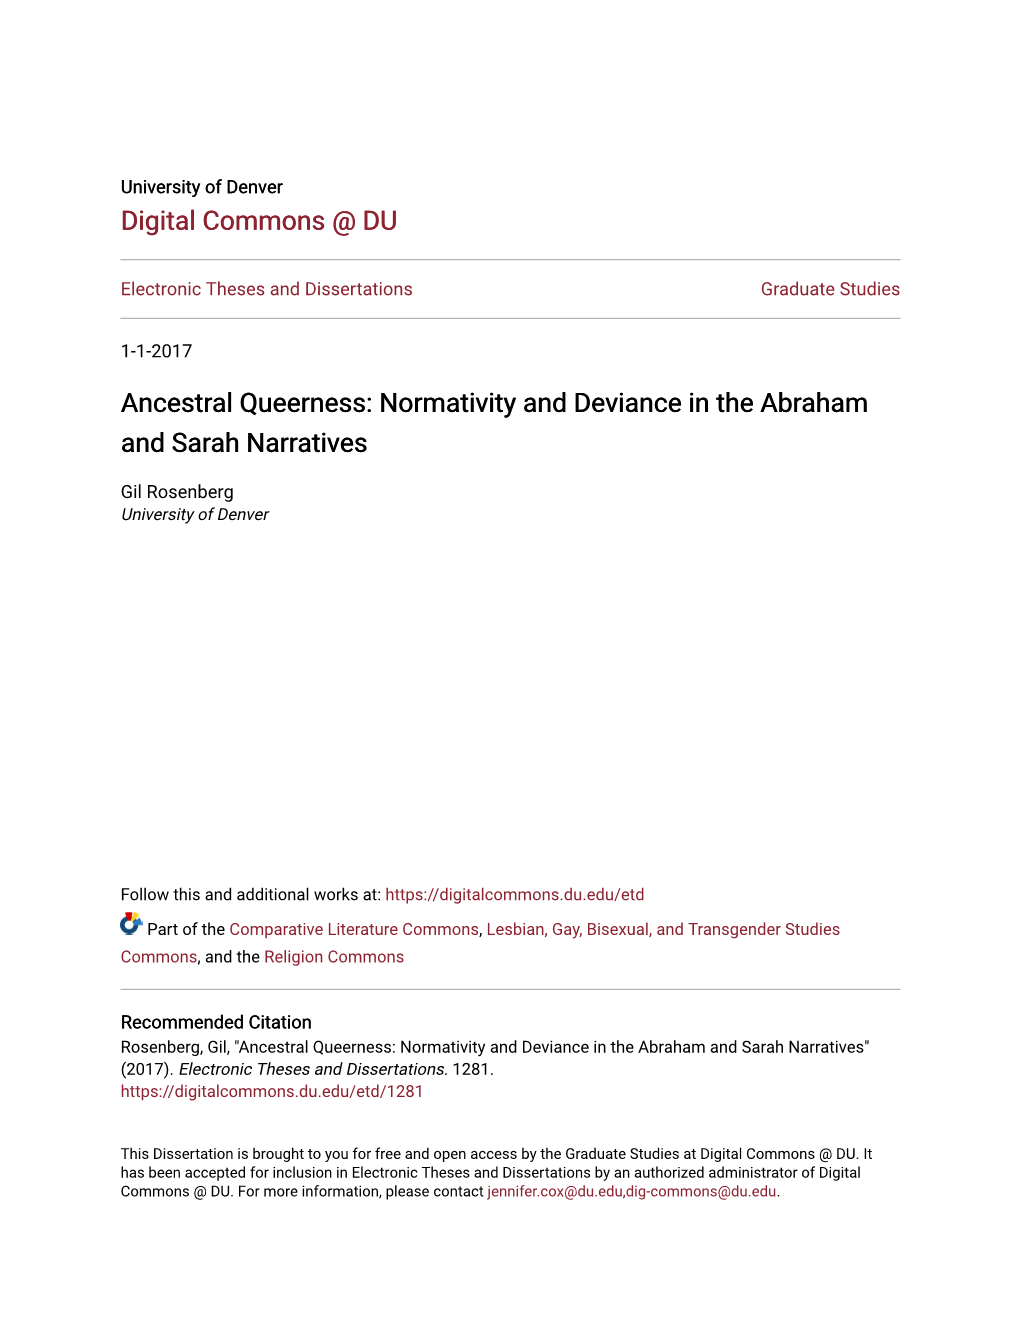 Ancestral Queerness: Normativity and Deviance in the Abraham and Sarah Narratives